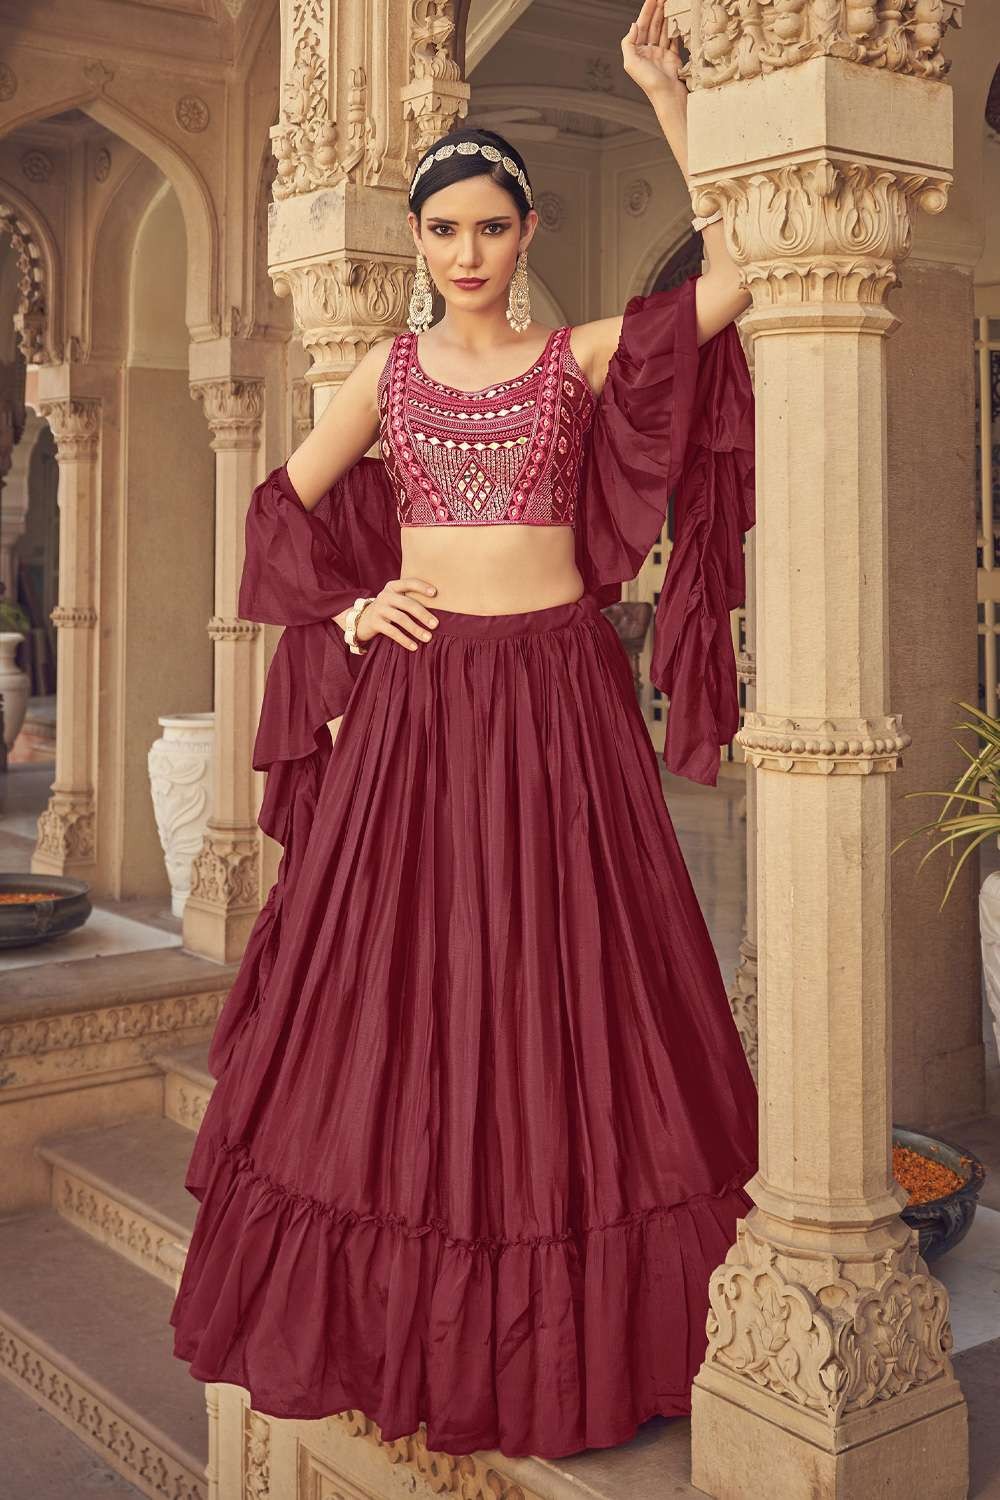 Buy Seven Star Creation Women's Party Wear Lehenga Choli (Color: Maroon  Free Size)Available on sell at Amazon.in